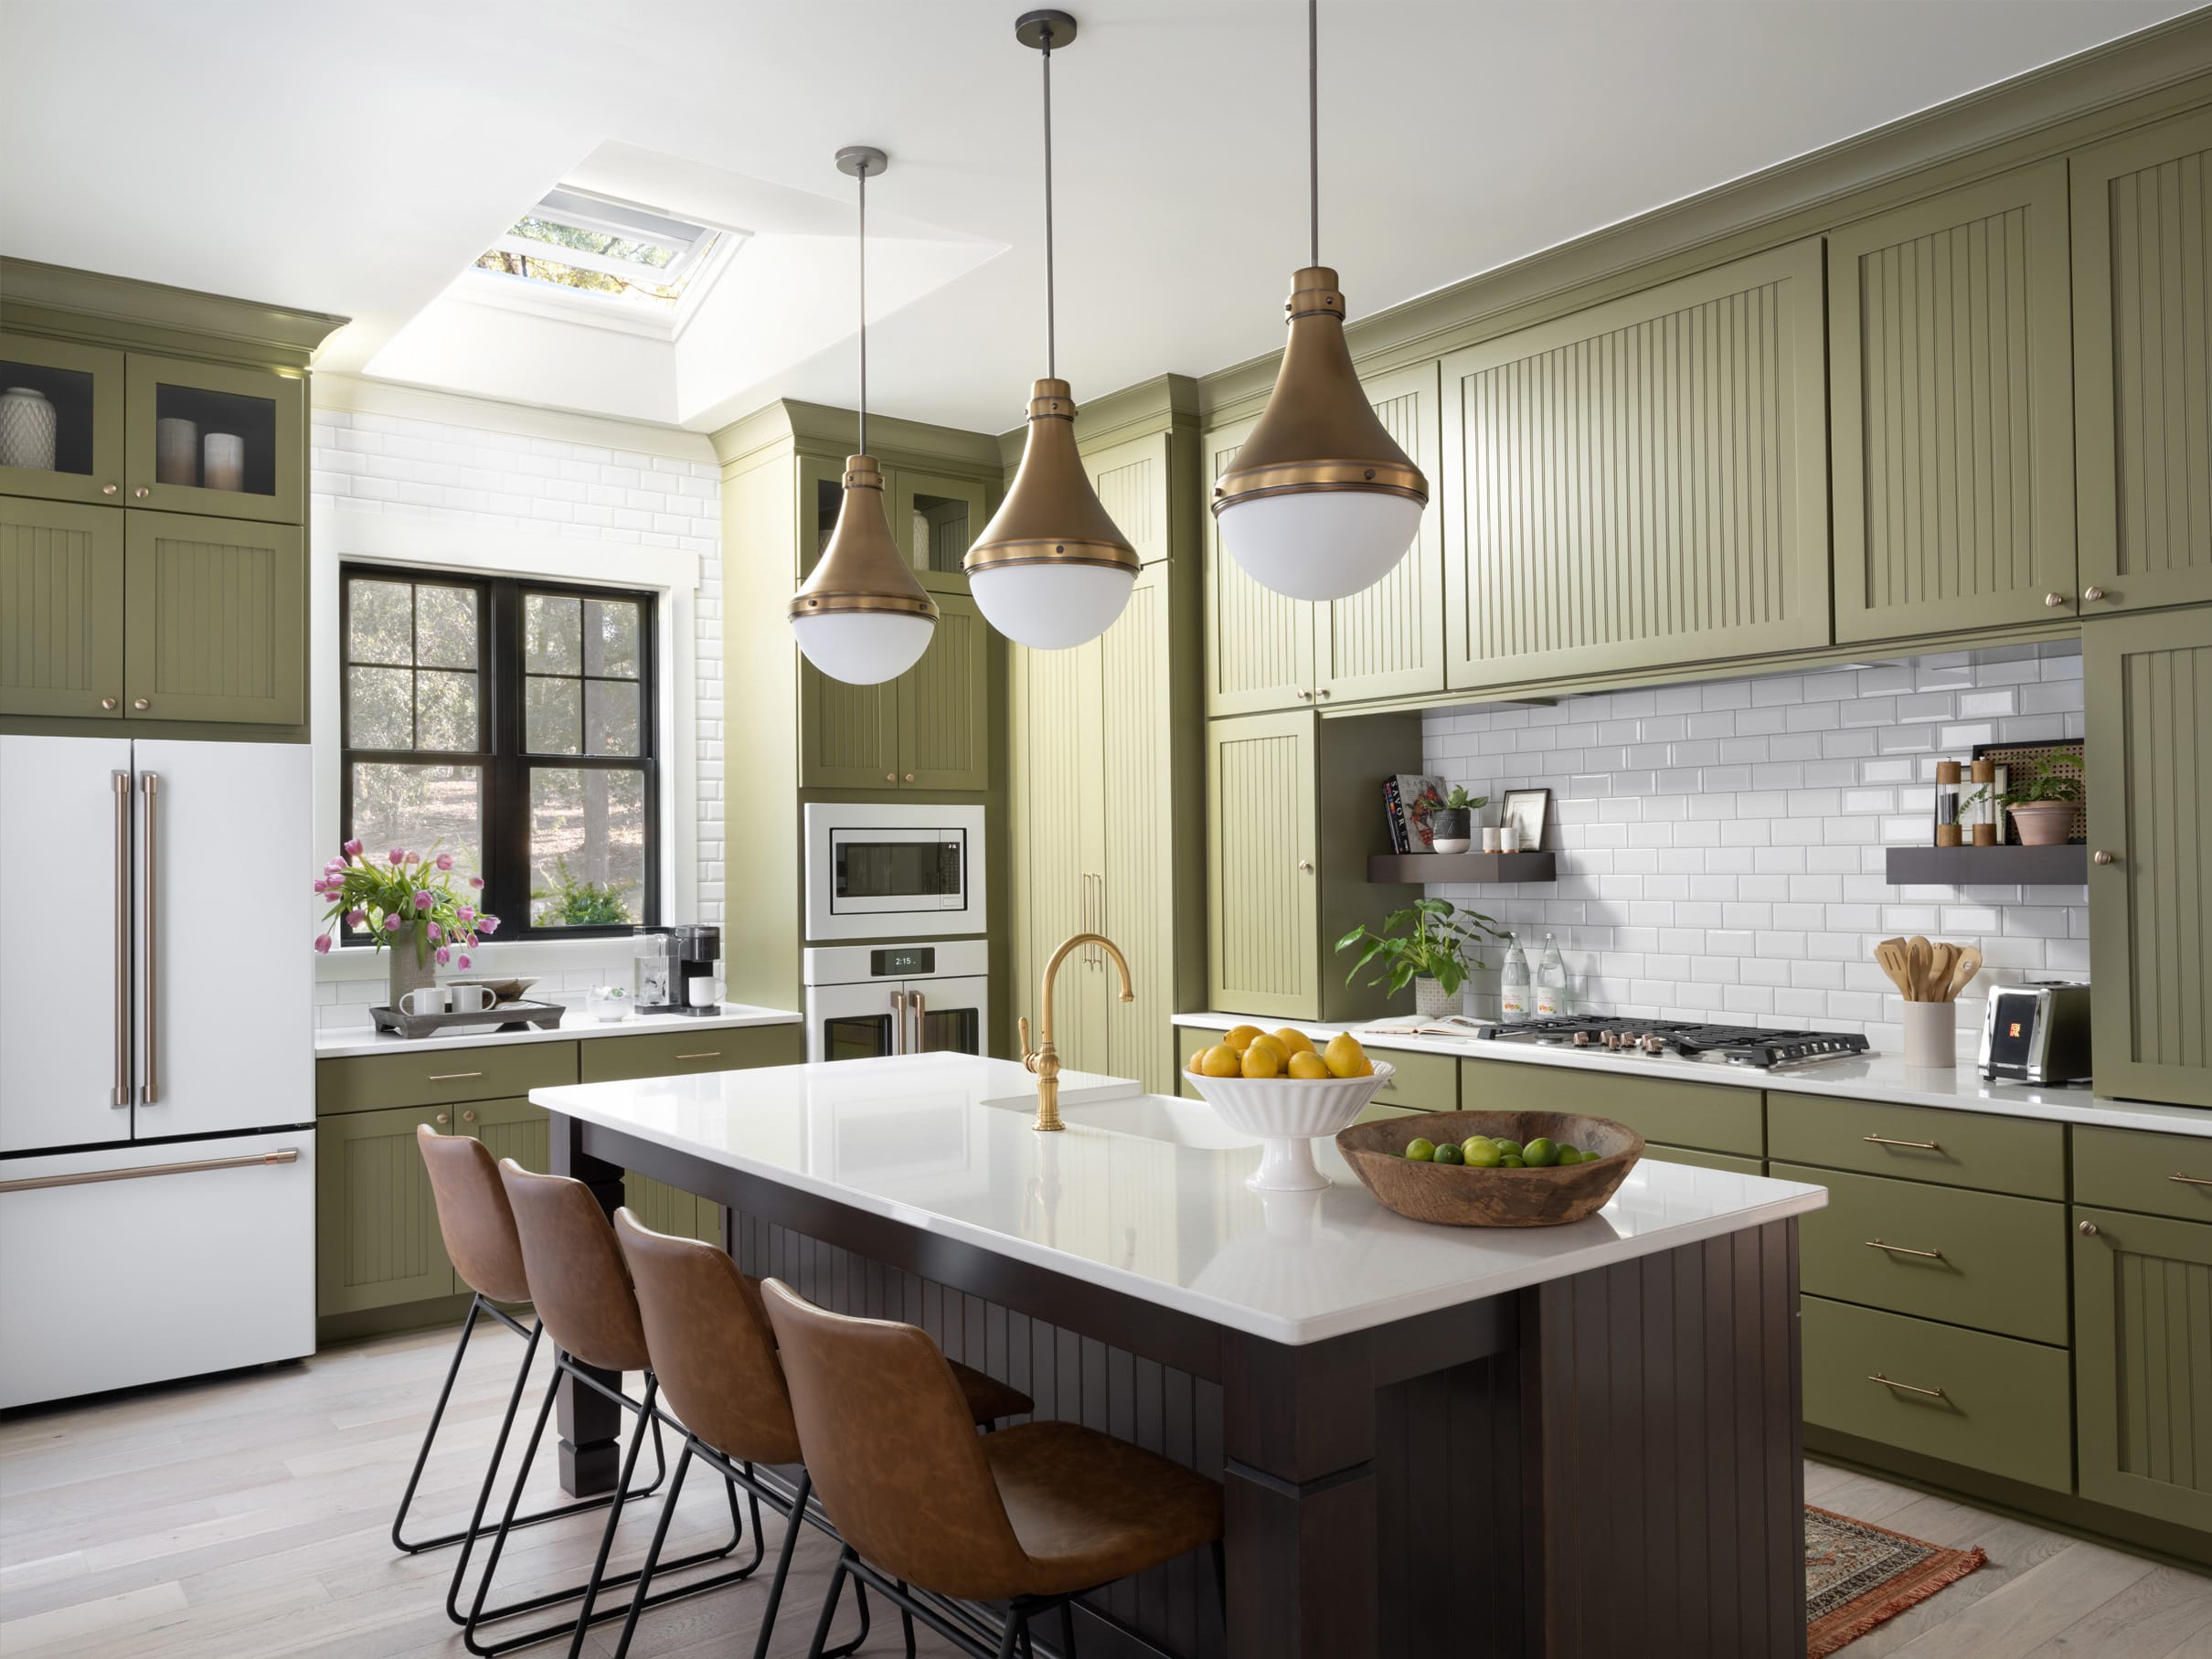 20 Retro Kitchen Ideas Inspired by the HGTV Smart Home® 20